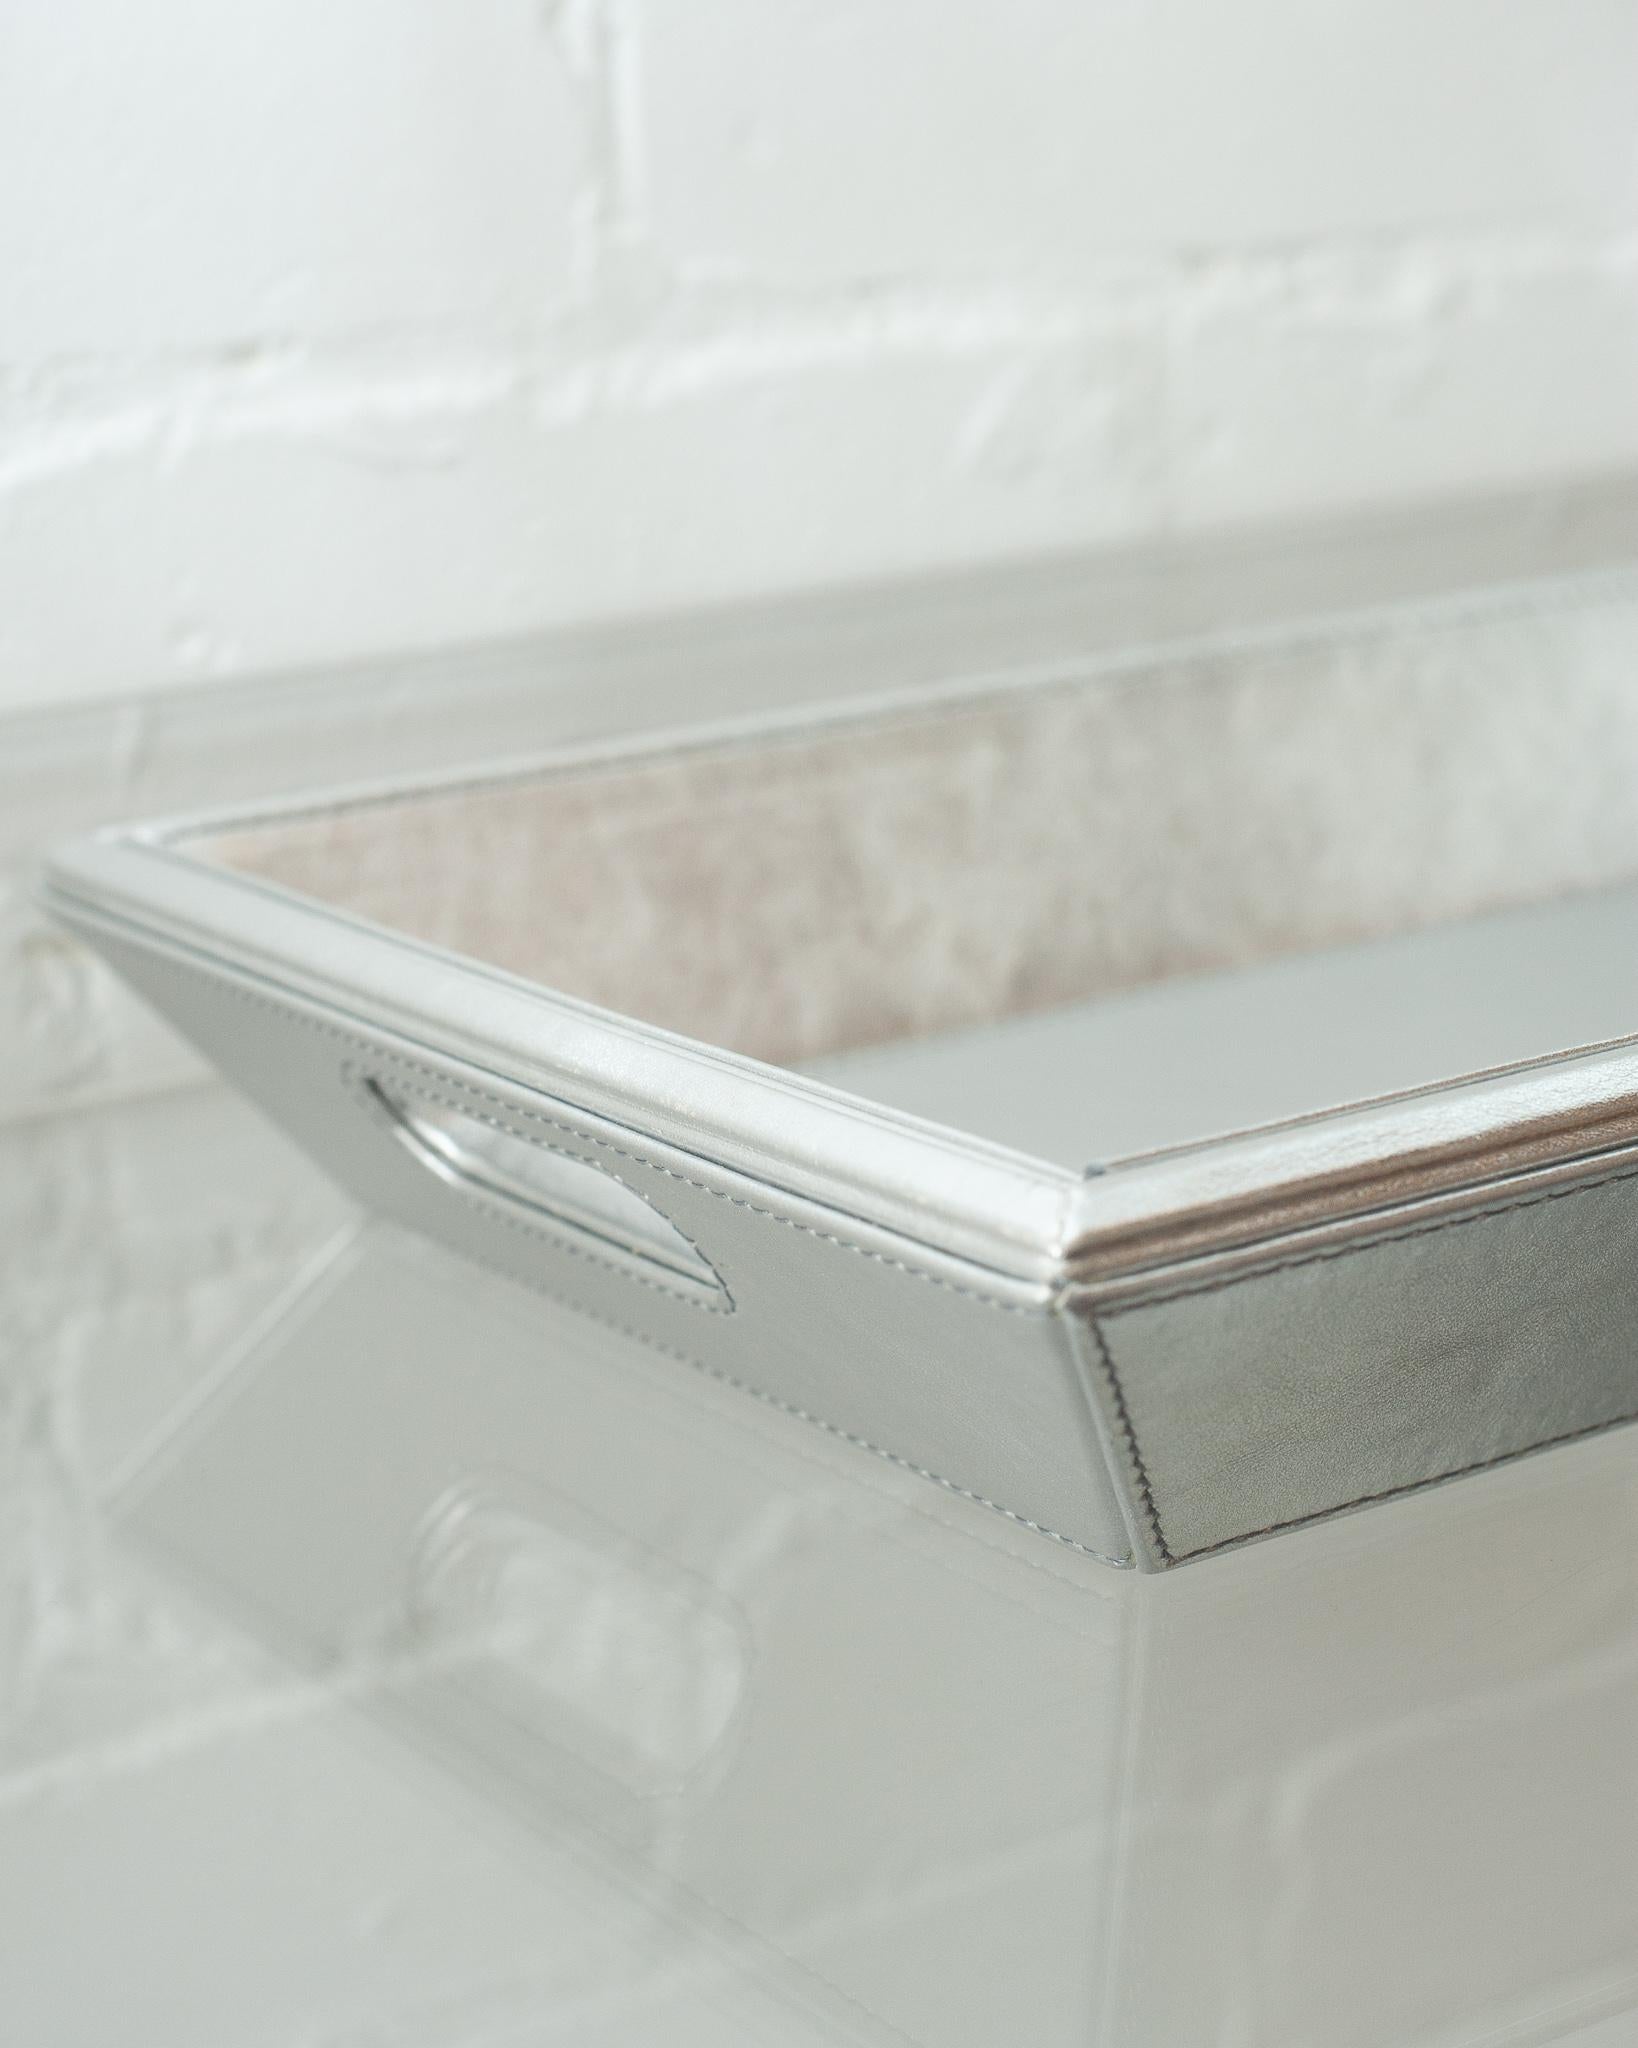 Contemporary Metallic Silver Leather Rectangular Tray  In New Condition For Sale In Toronto, ON